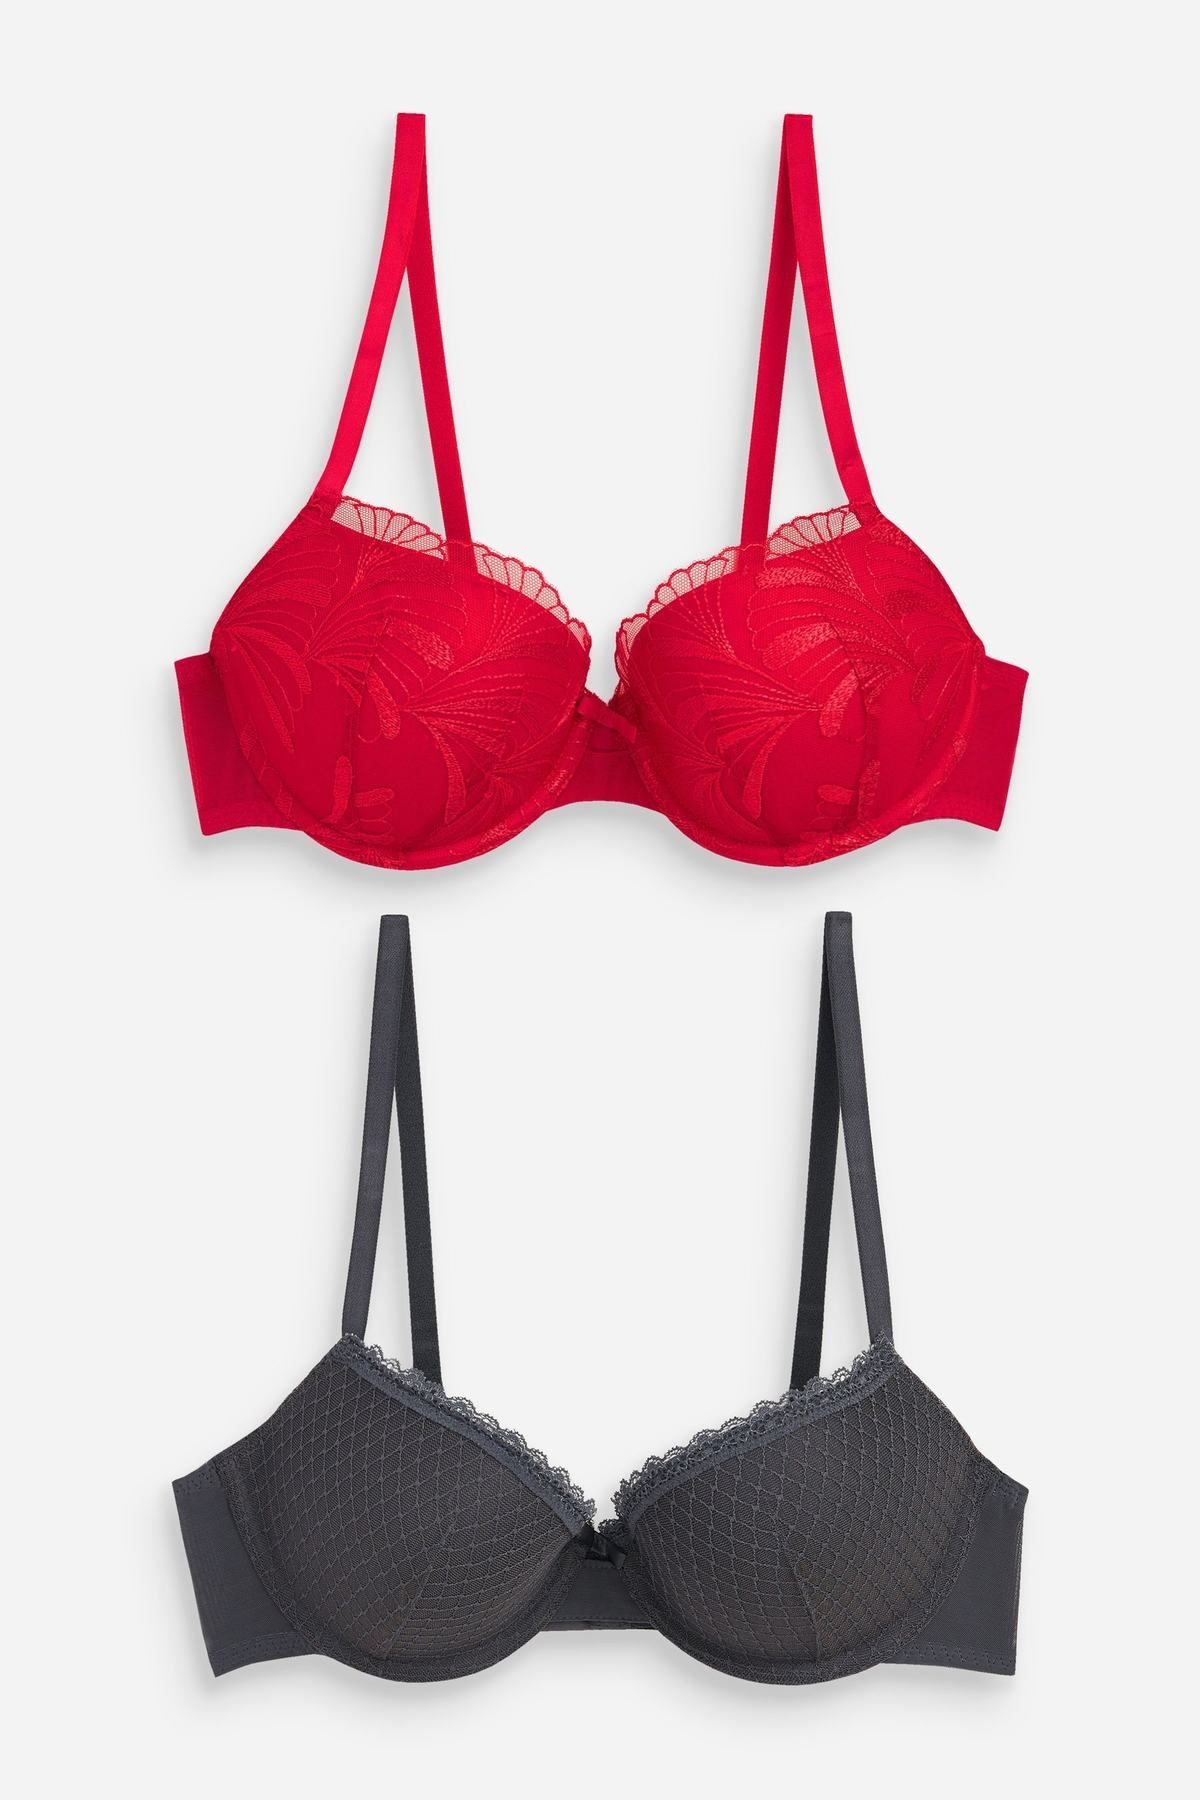 Buy Elina Women's Maroon Red B-Cup Pushup Bra (Set of 2) Online at